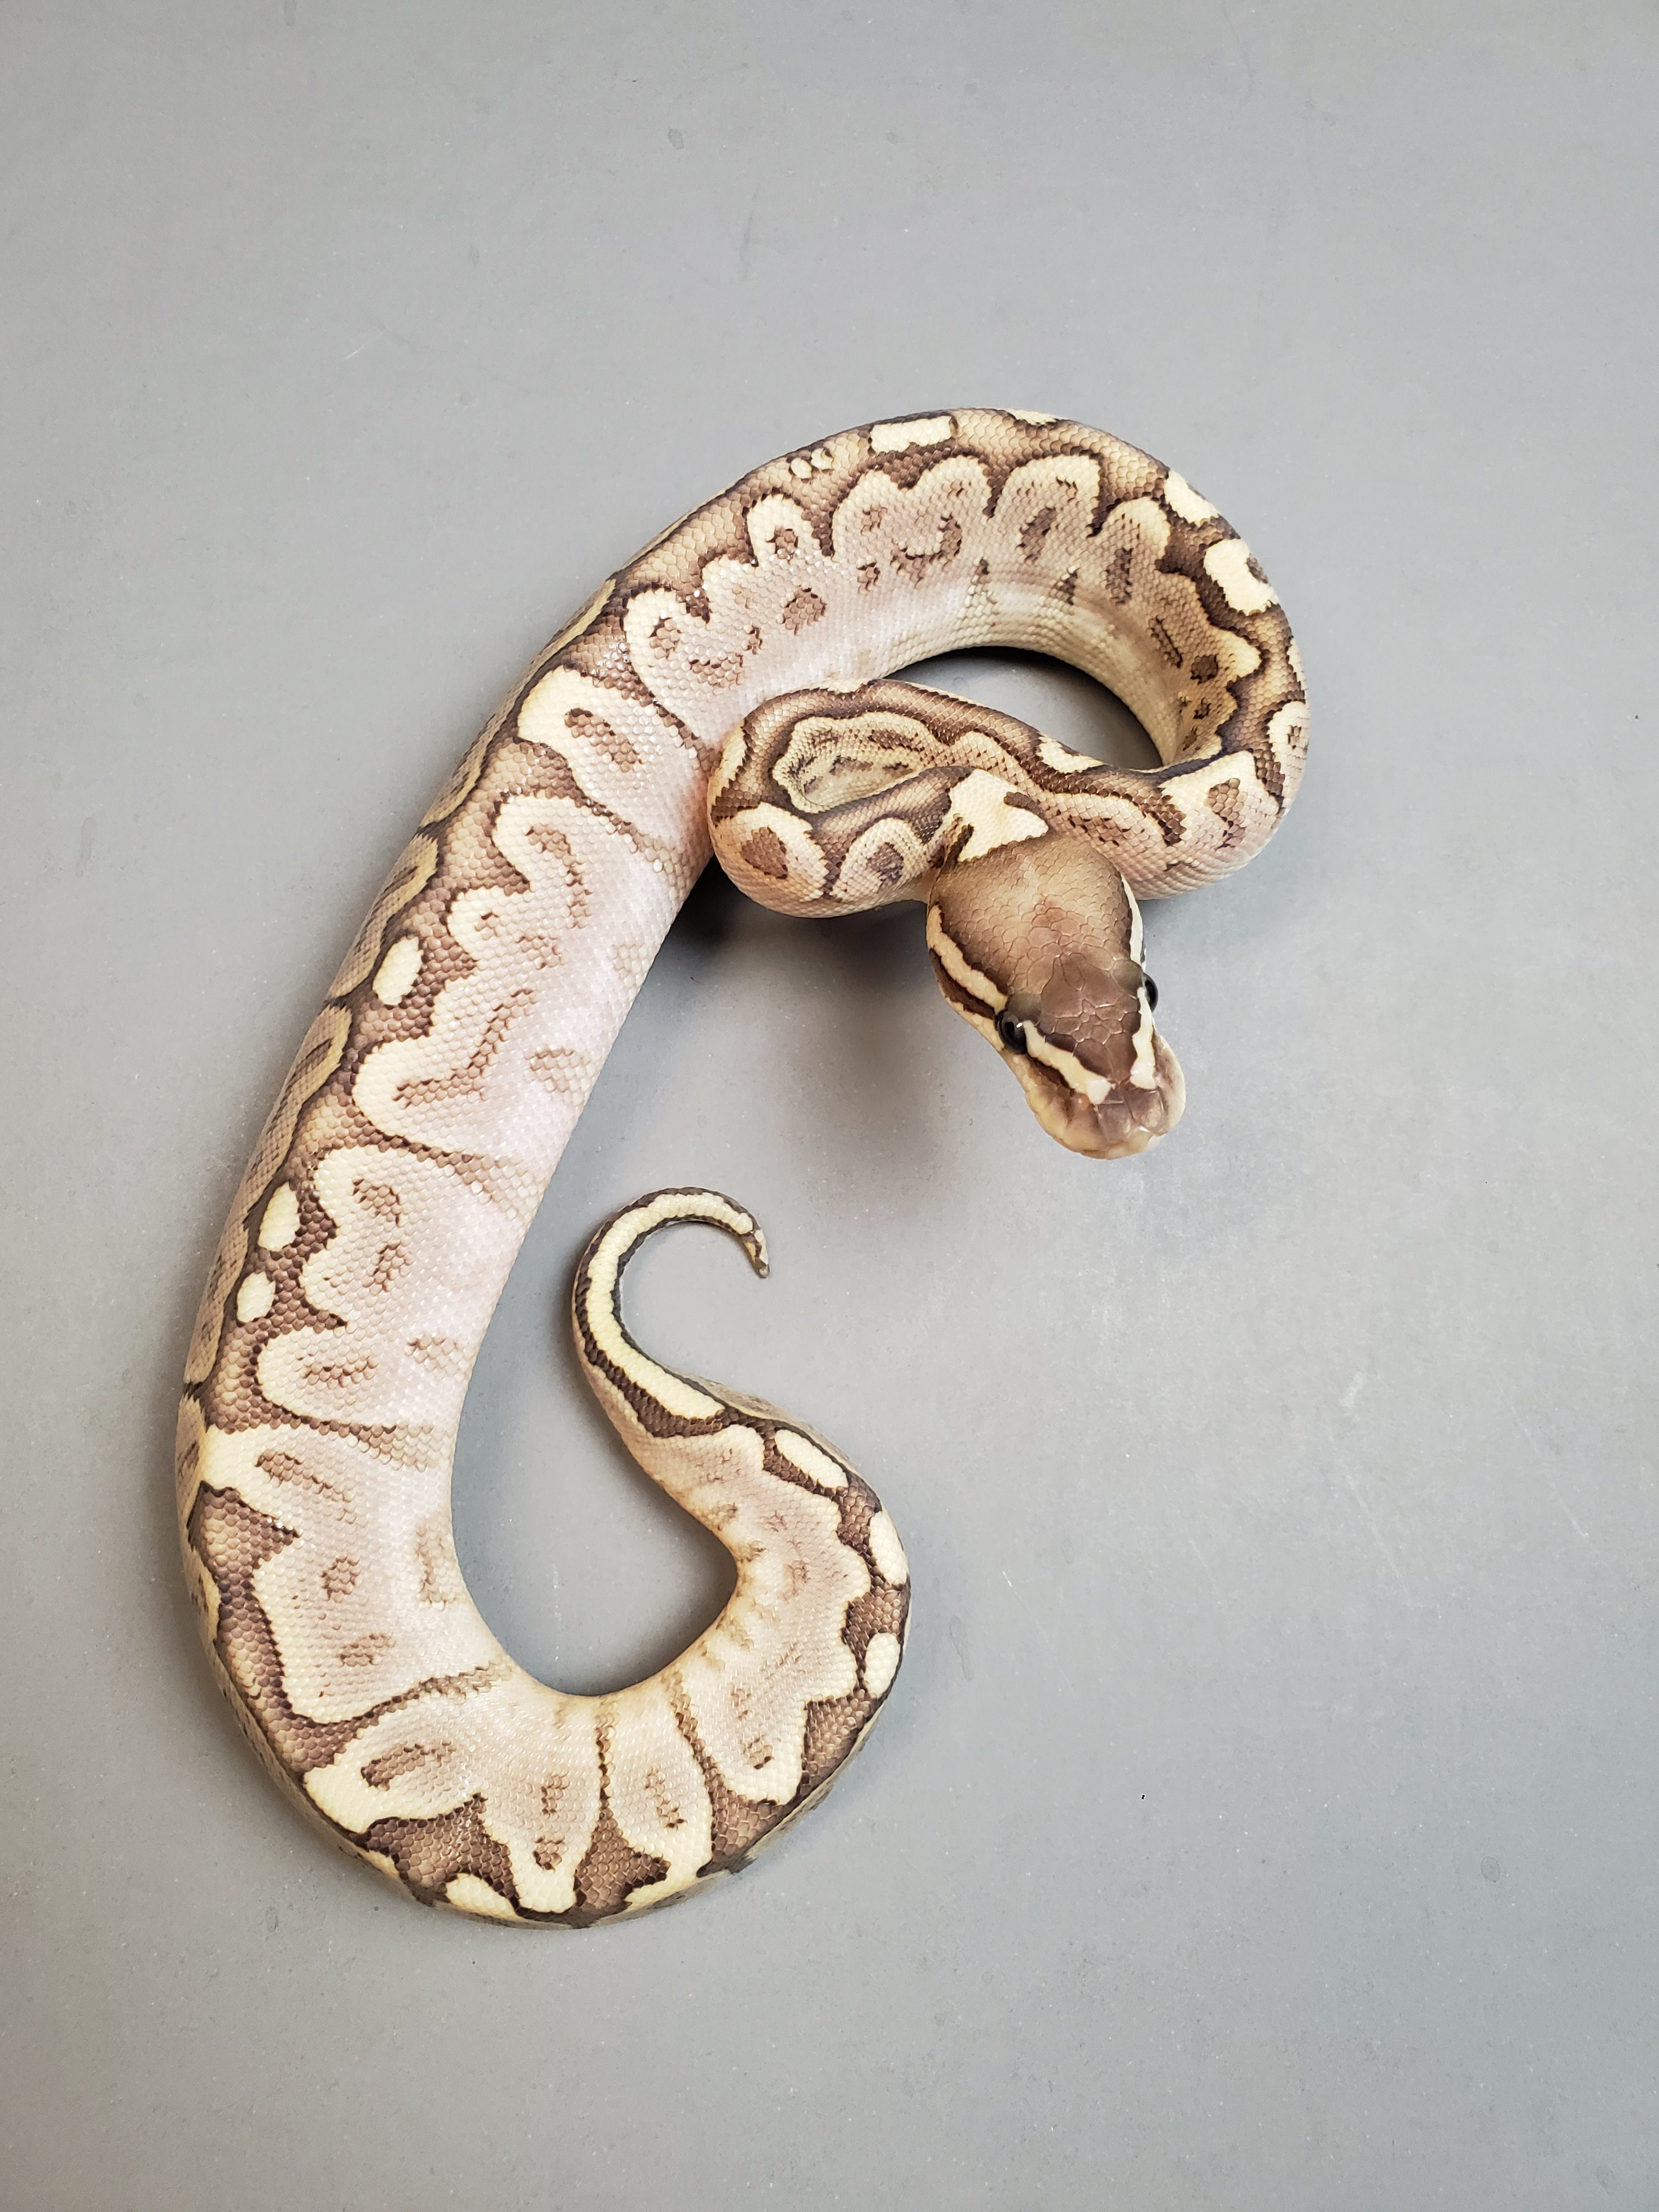 Bamboo Ball Python by Emberleaf Reptiles (#223431)